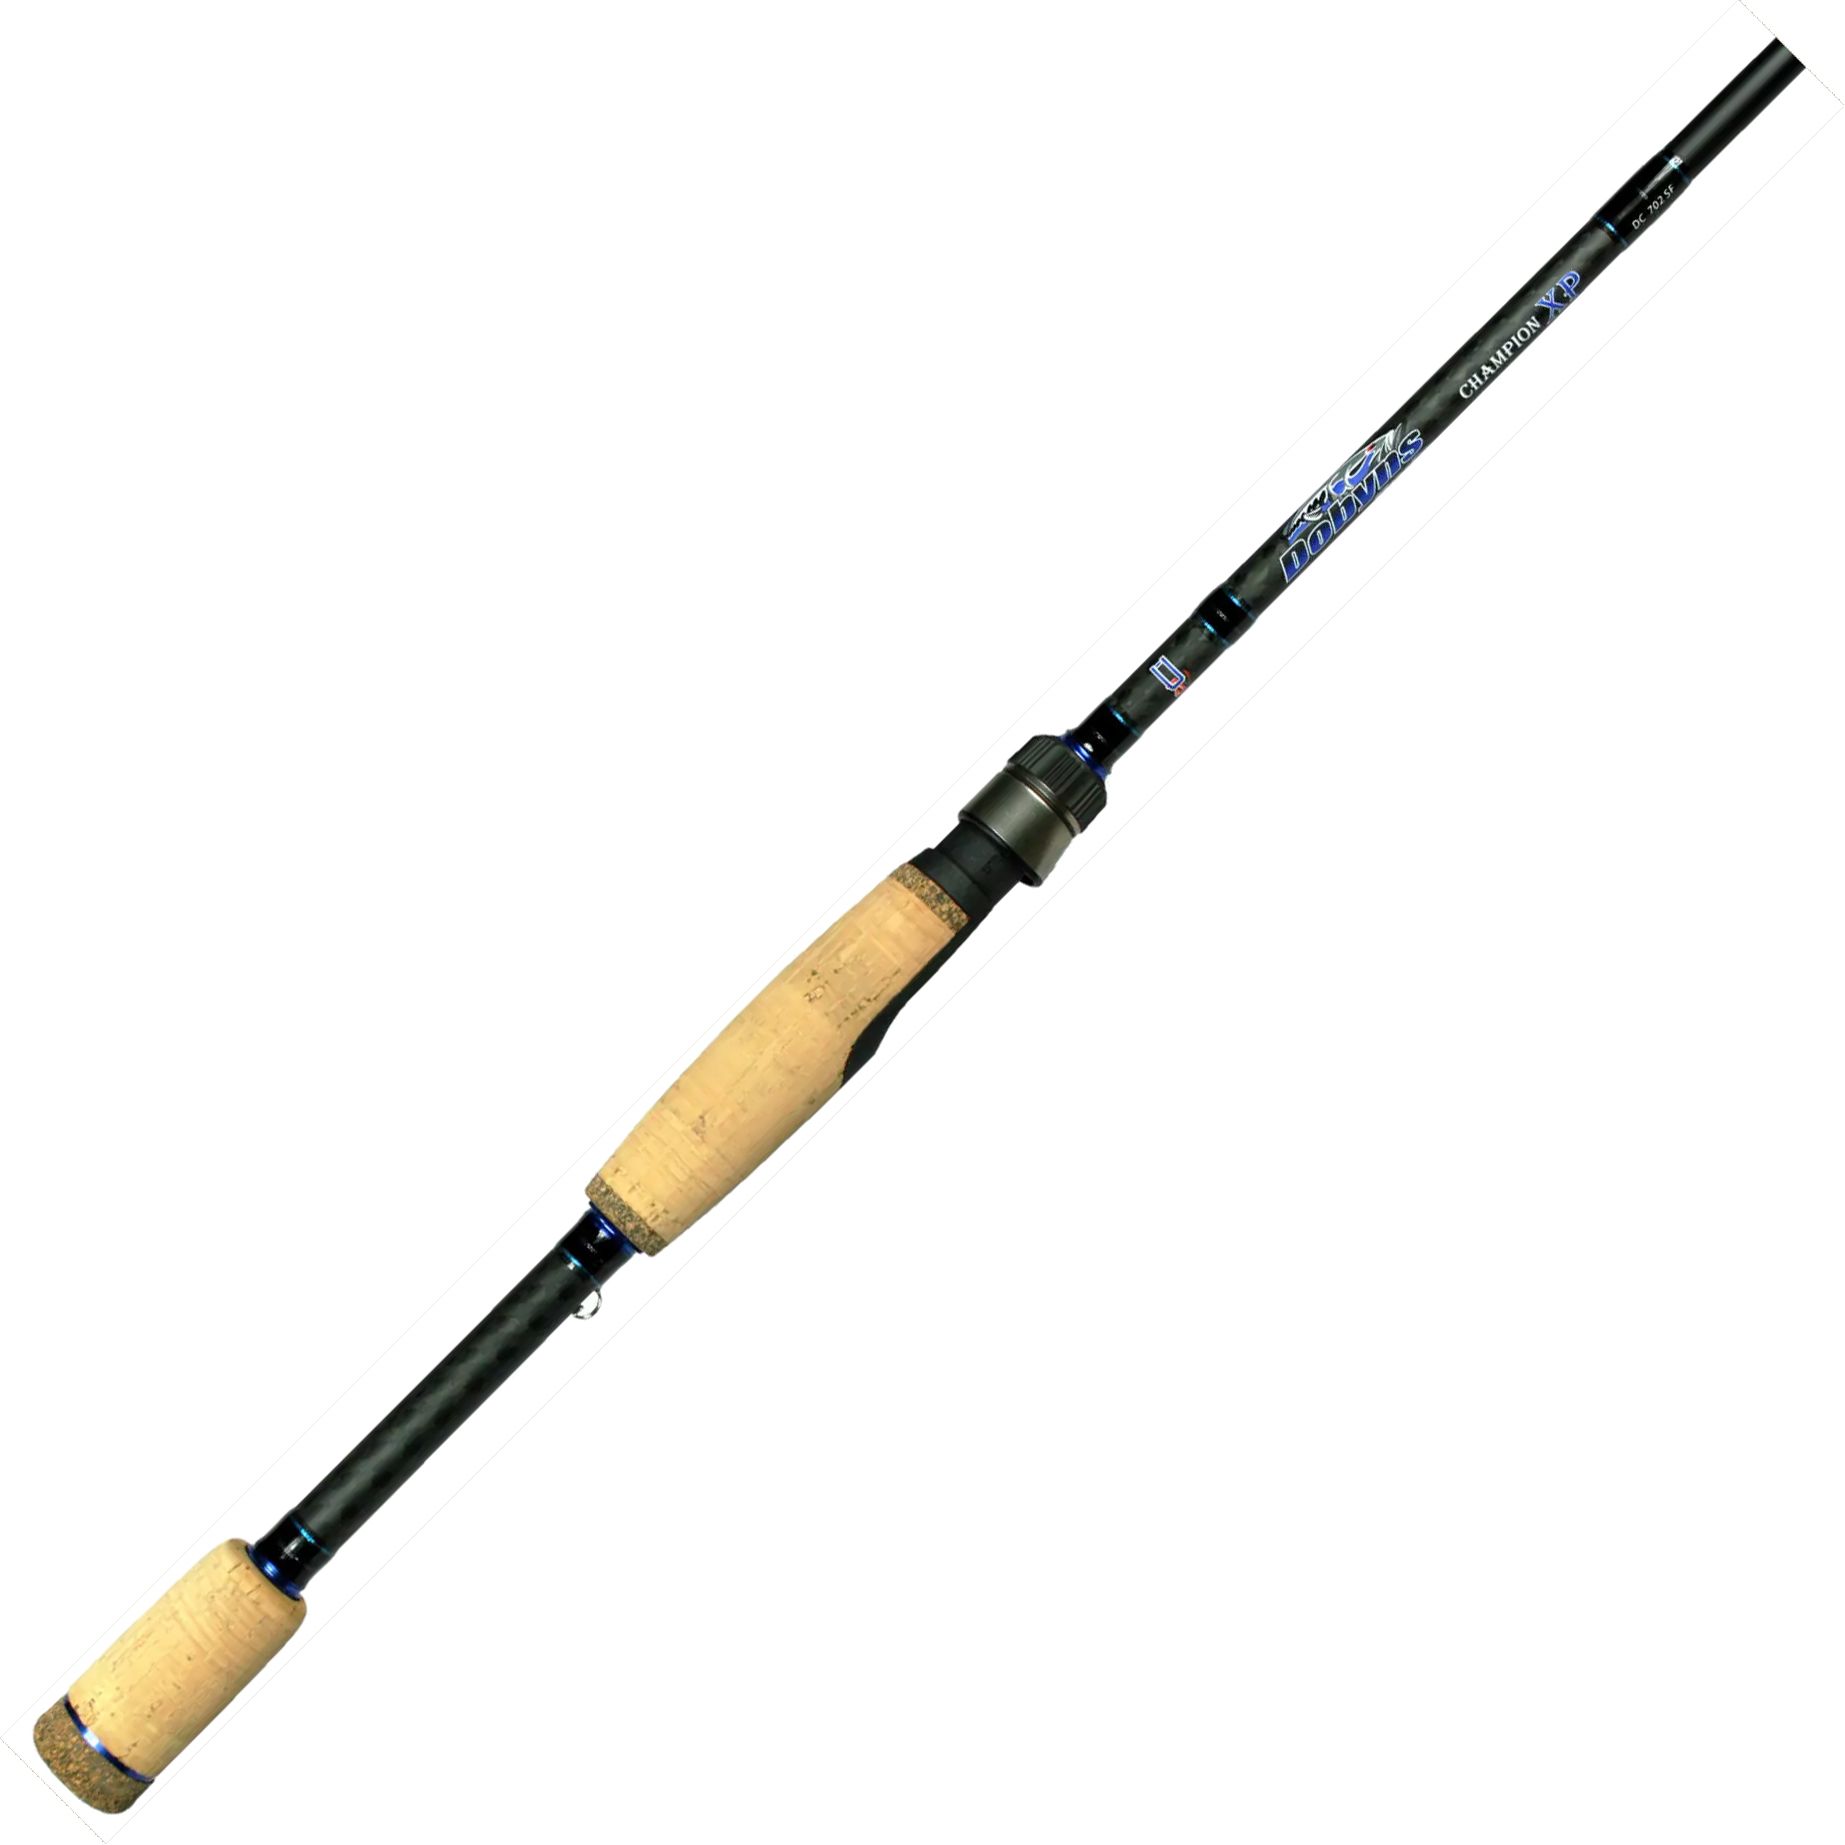 Photos - Other for Fishing Dobyns Champion XP Spinning Rod - Split Cork Handle 22DBYUCHMPNXPDC73RODH